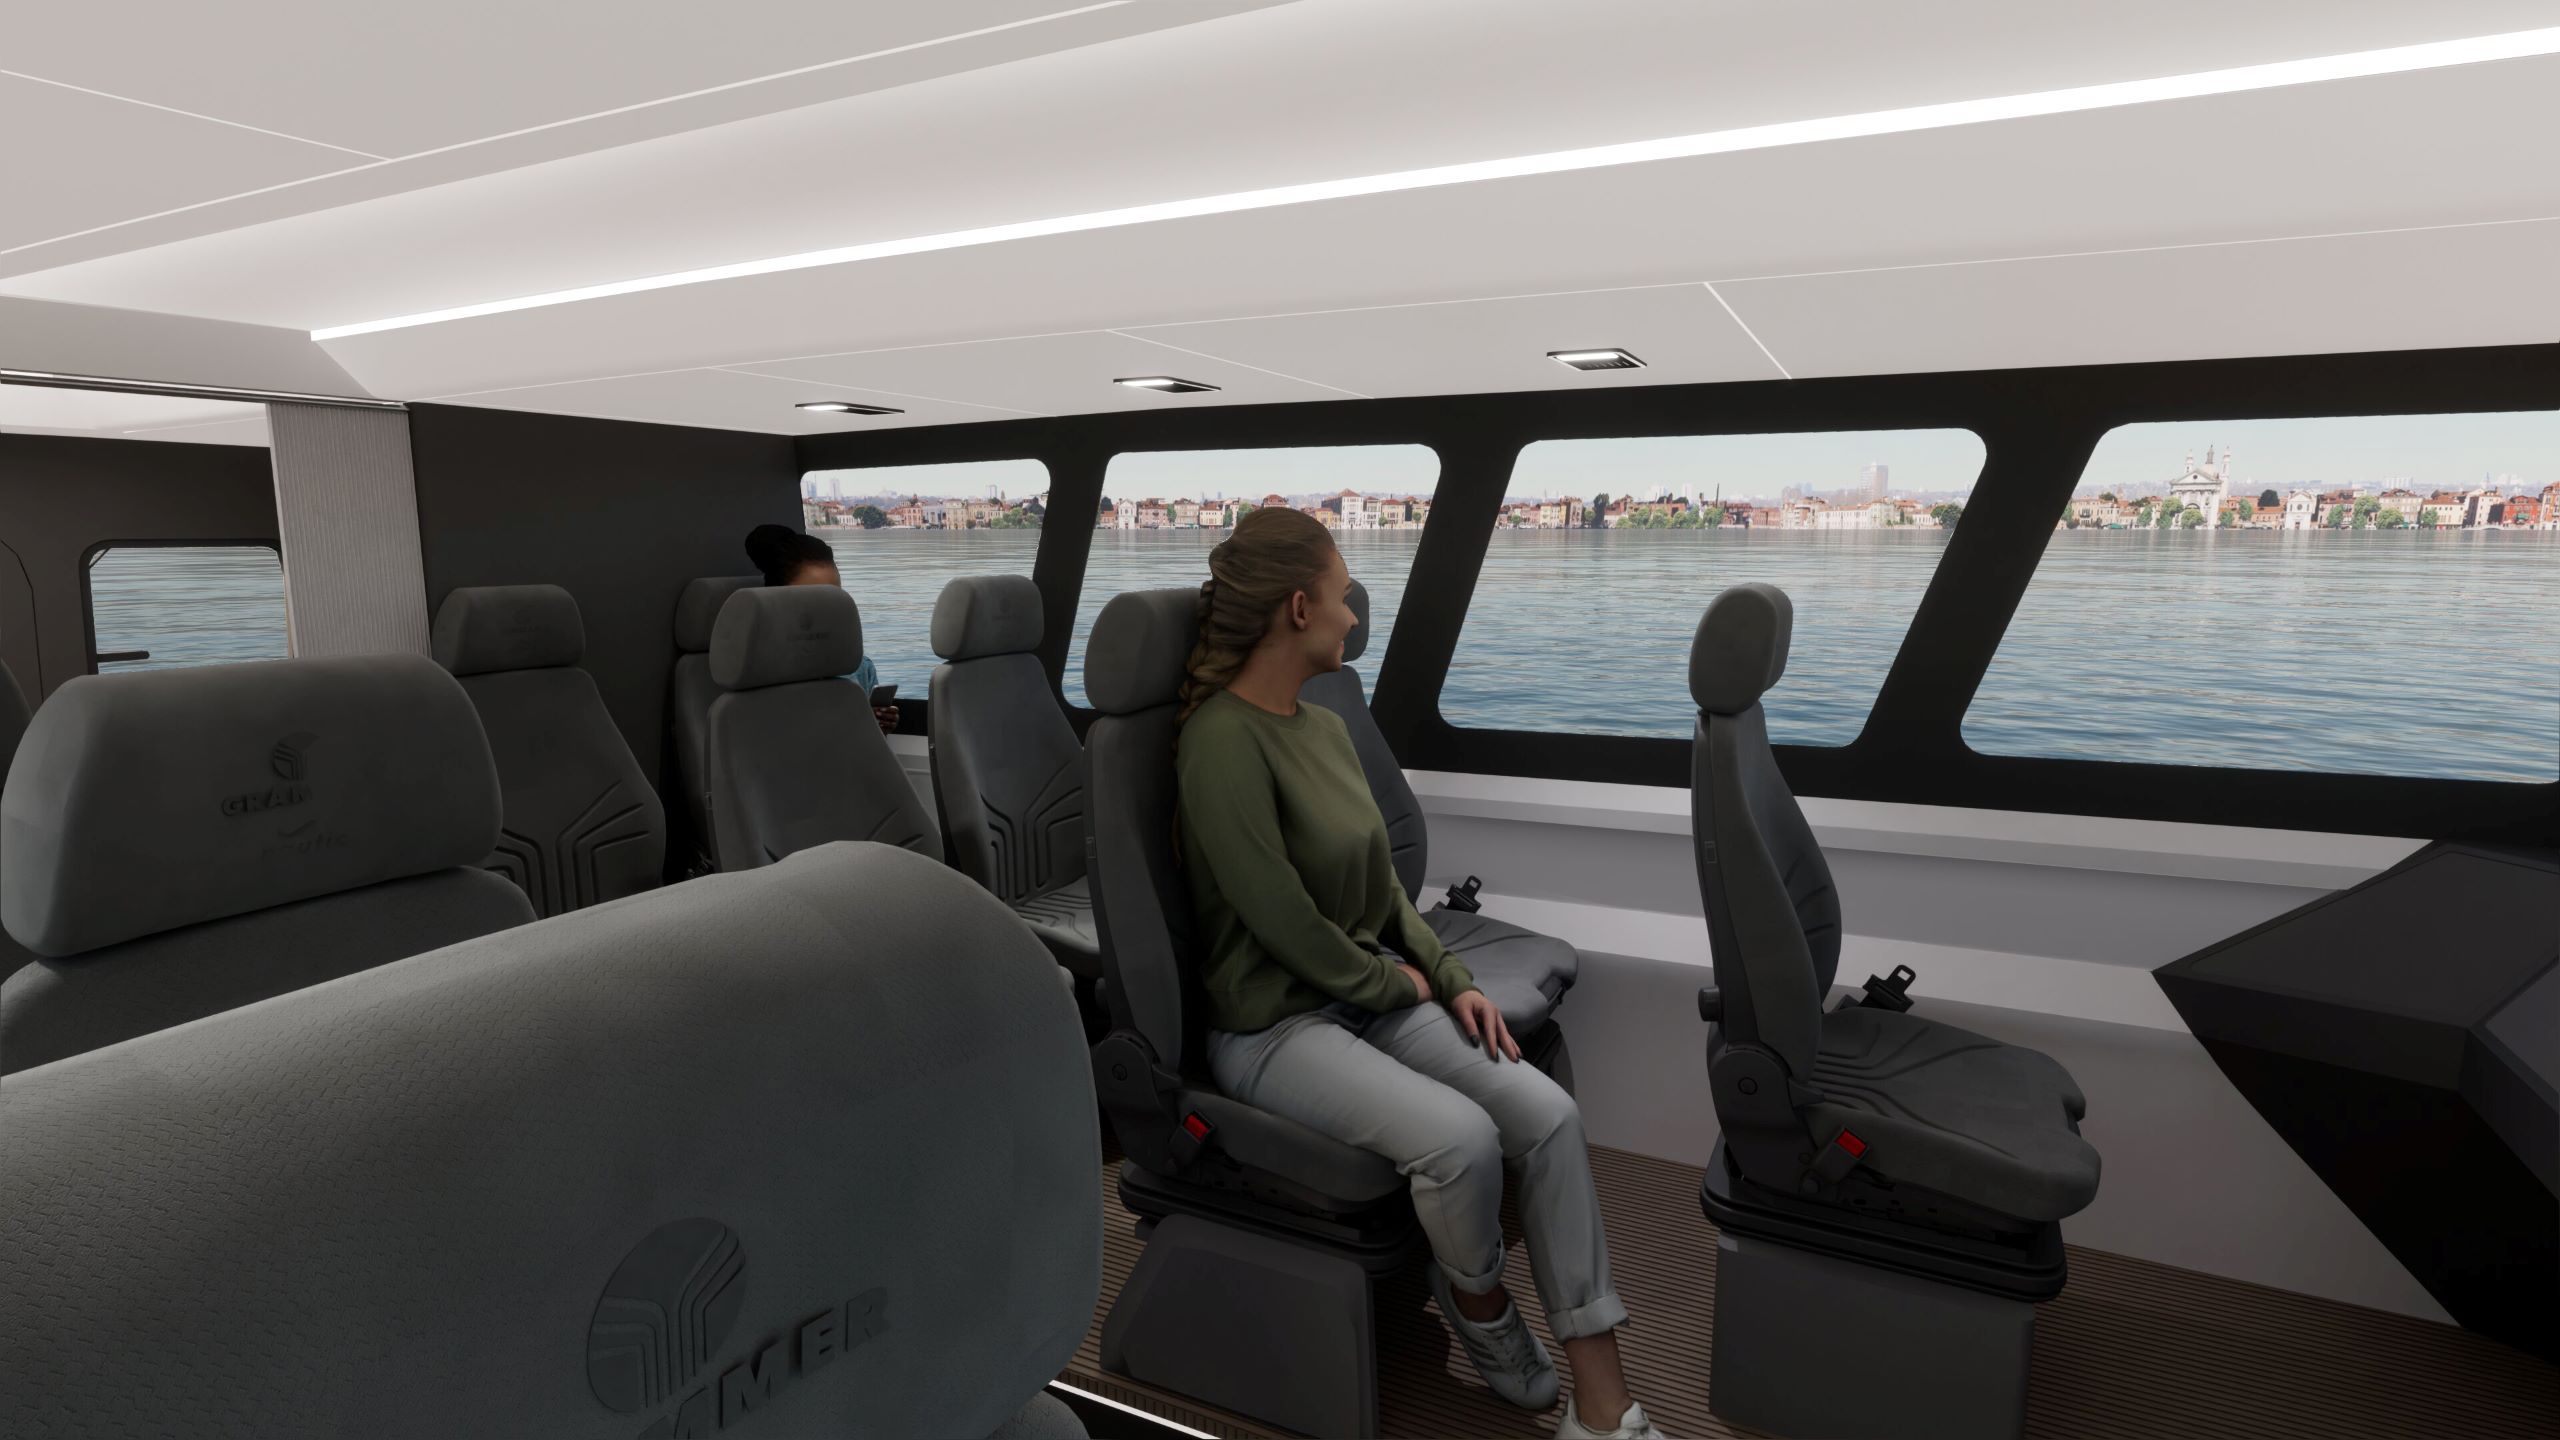 Artemis EF-12 Workboat XL boat interior with a lady sitting in a comfortable seat